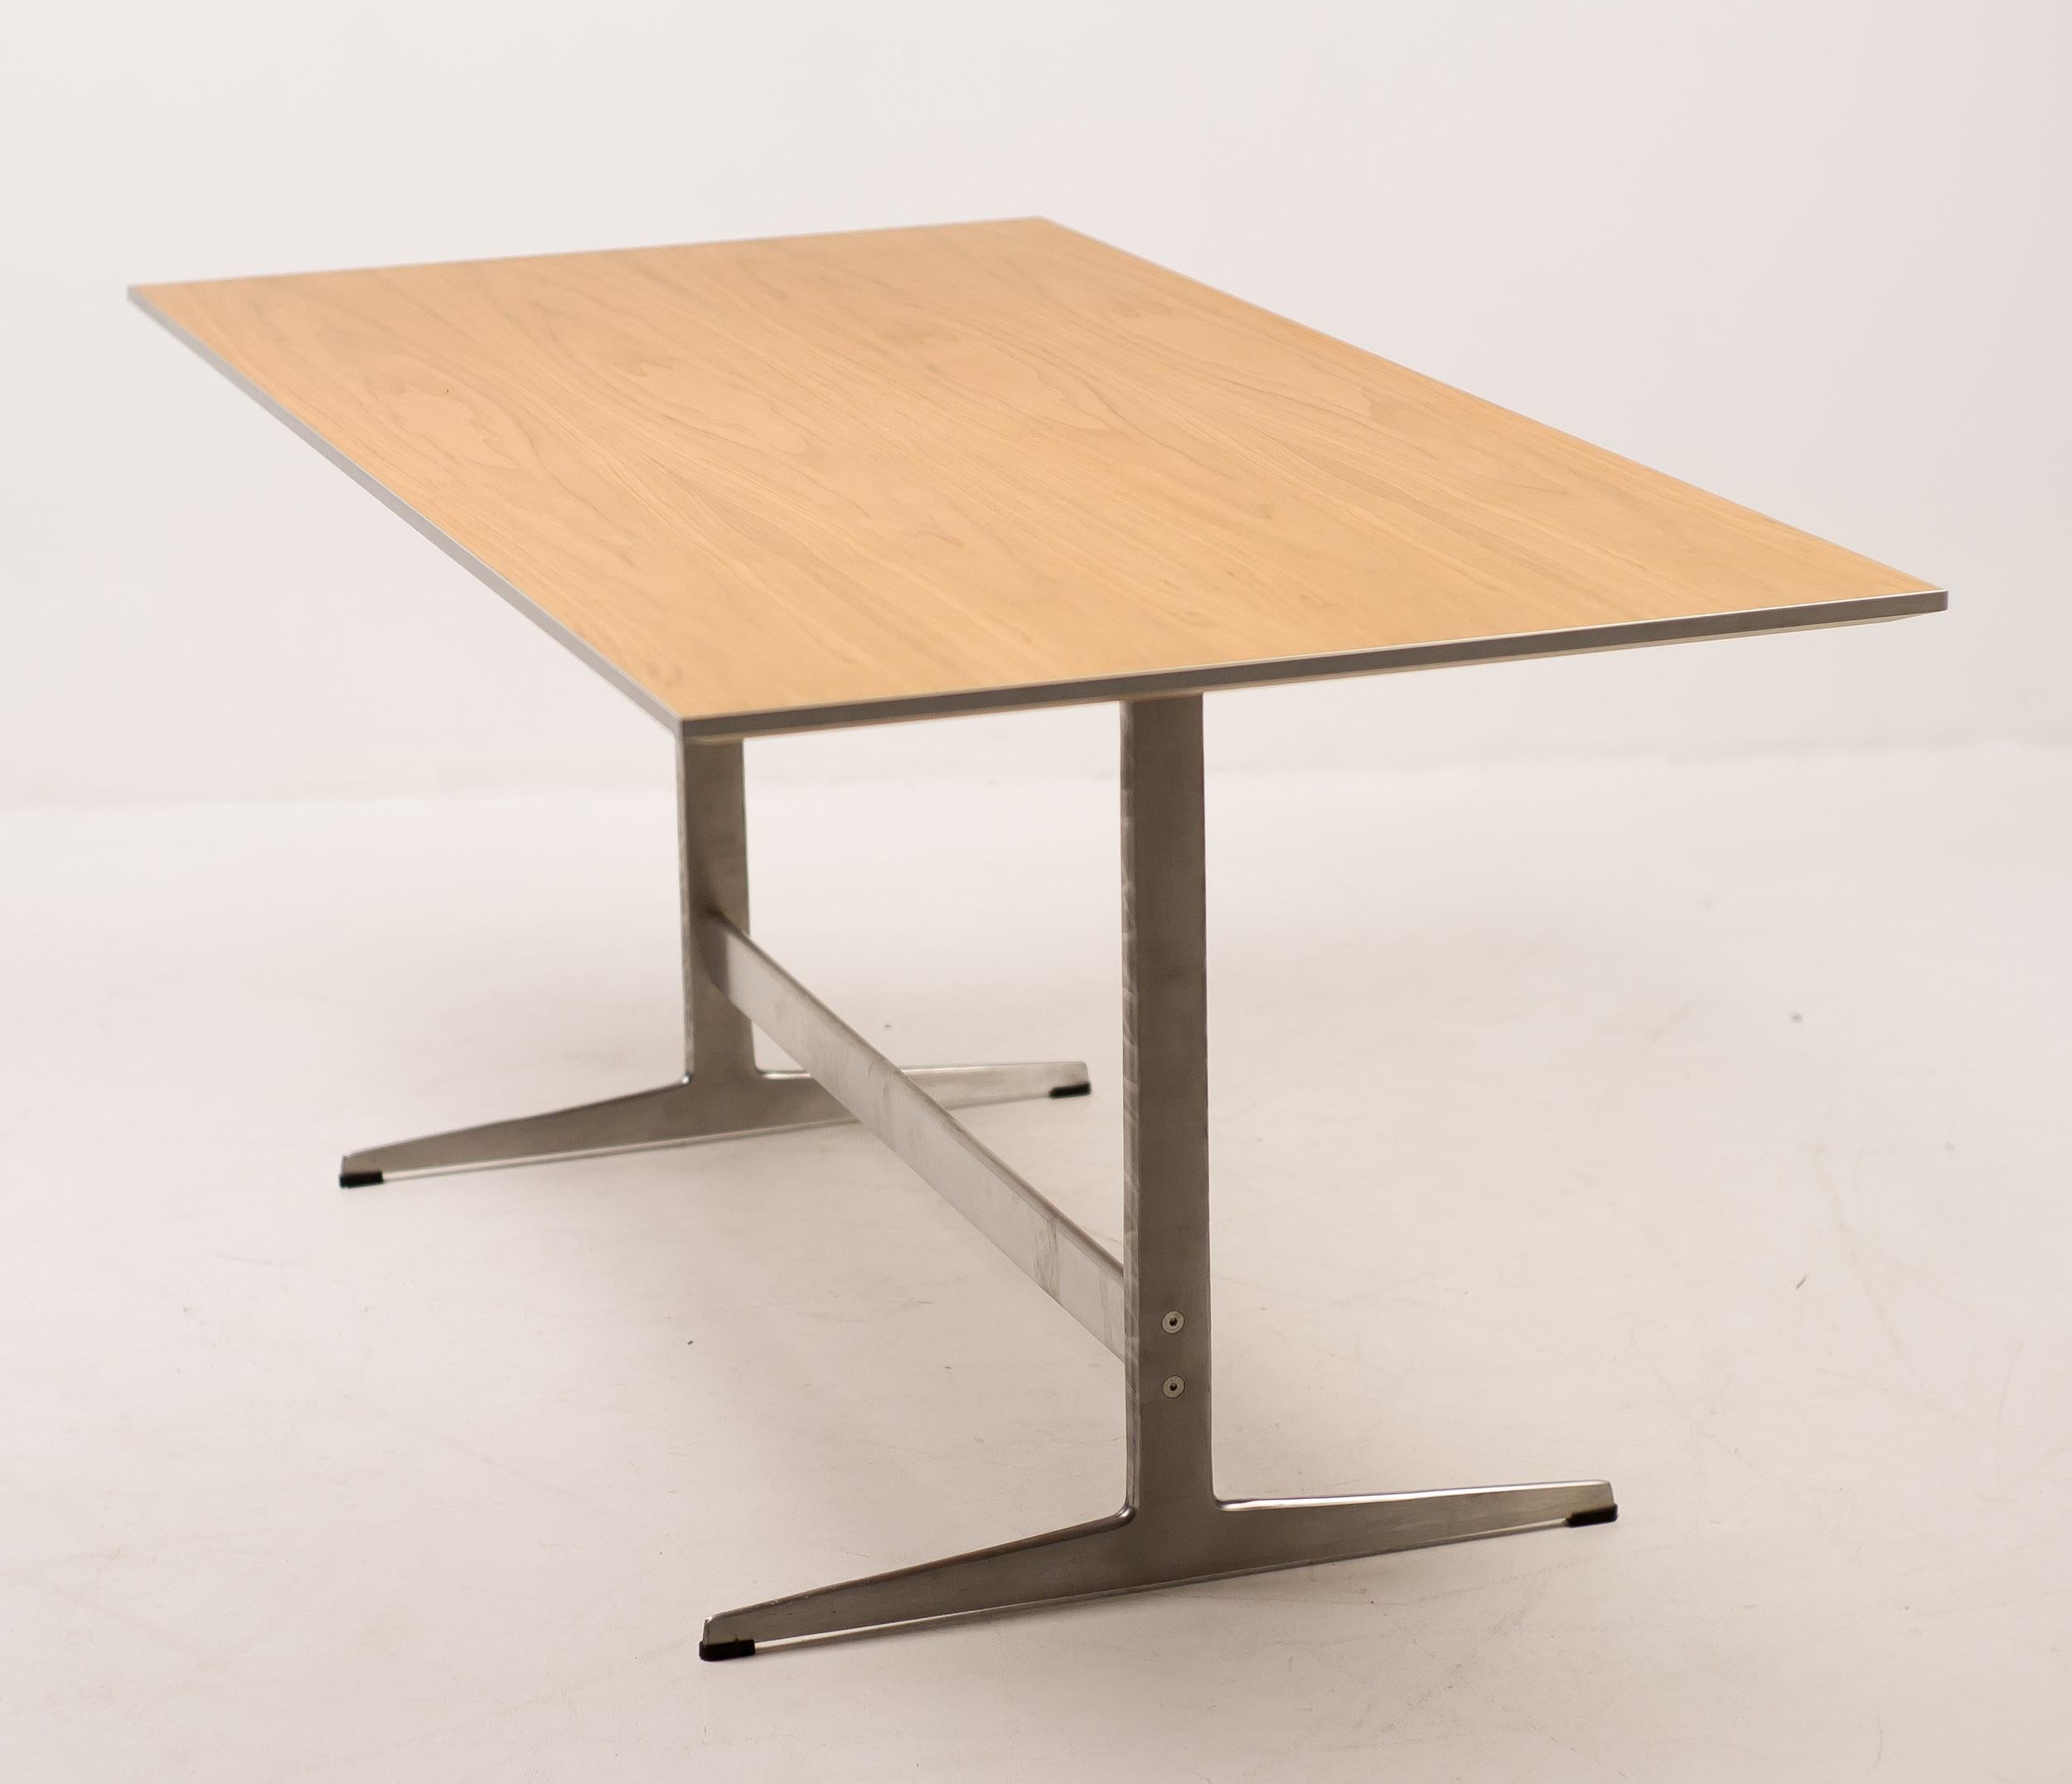 Contemporary Shaker Table in Walnut by Arne Jacobsen